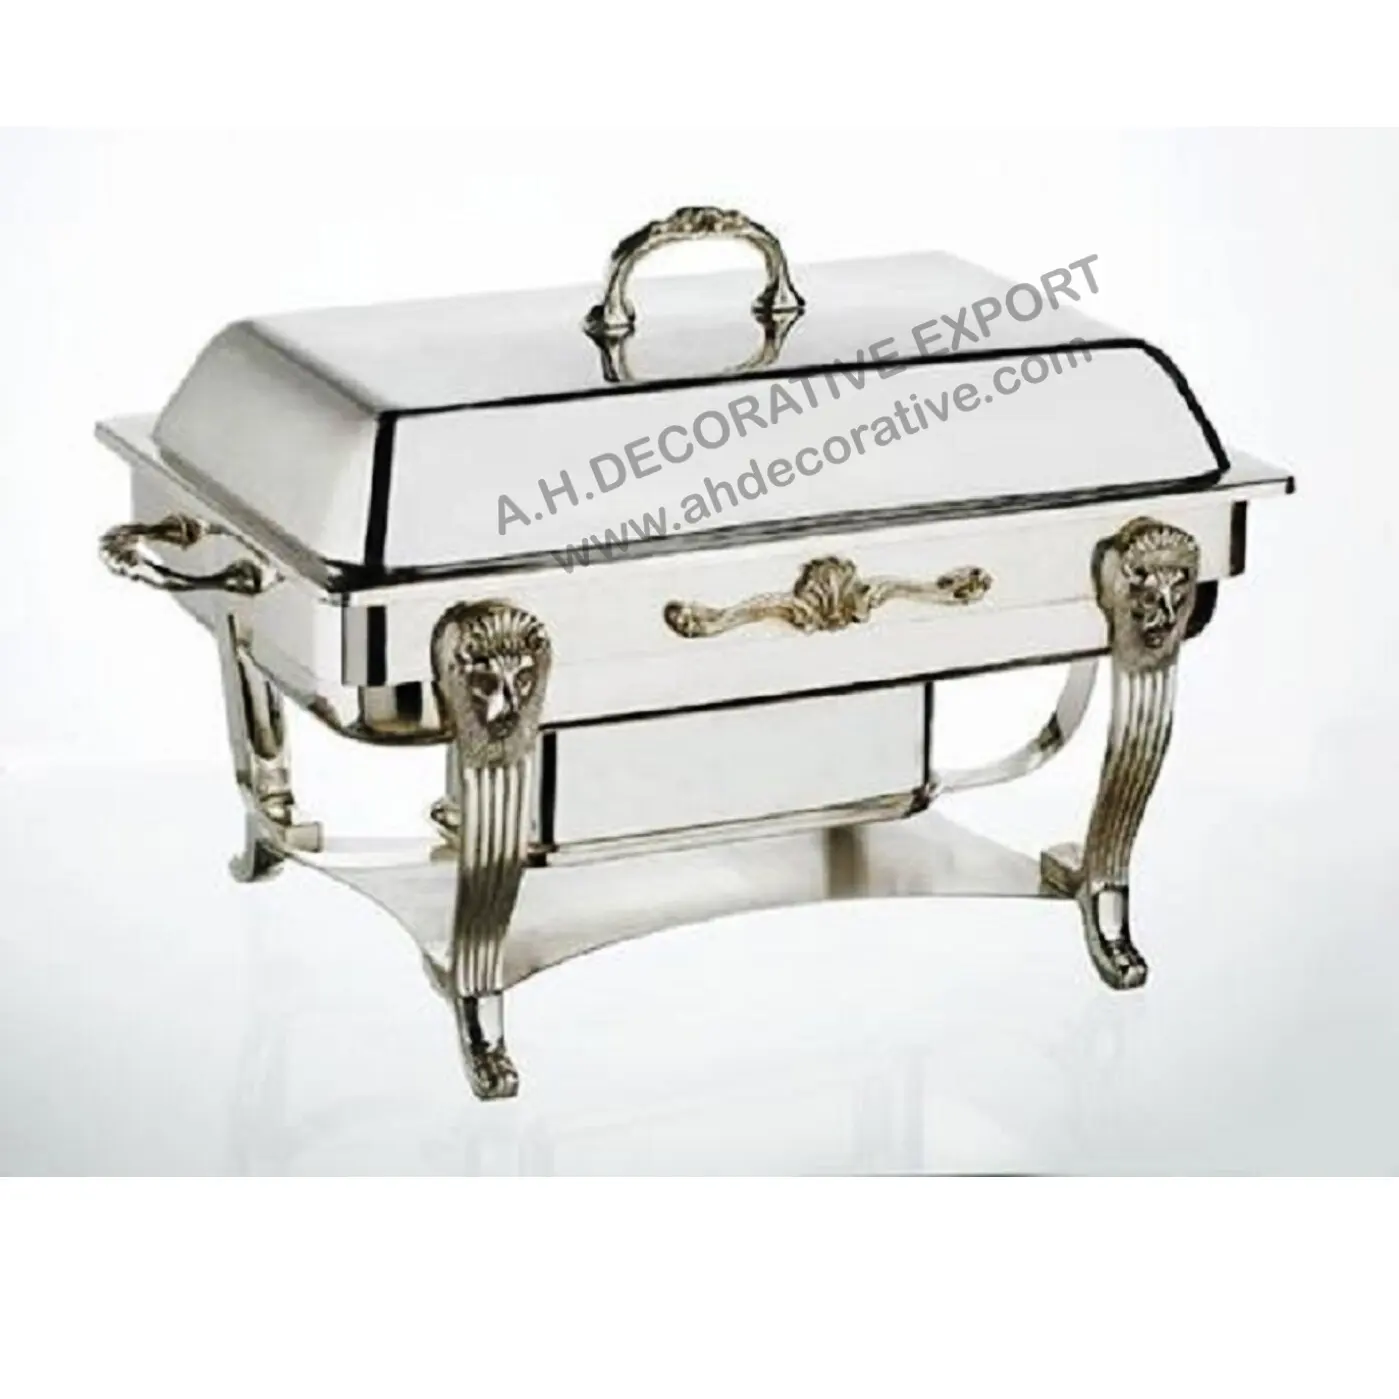 New Rectangular Shape Used Food Warmer Buffet Chafing Dish With handle & Stand Base For Table Top Centerpiece